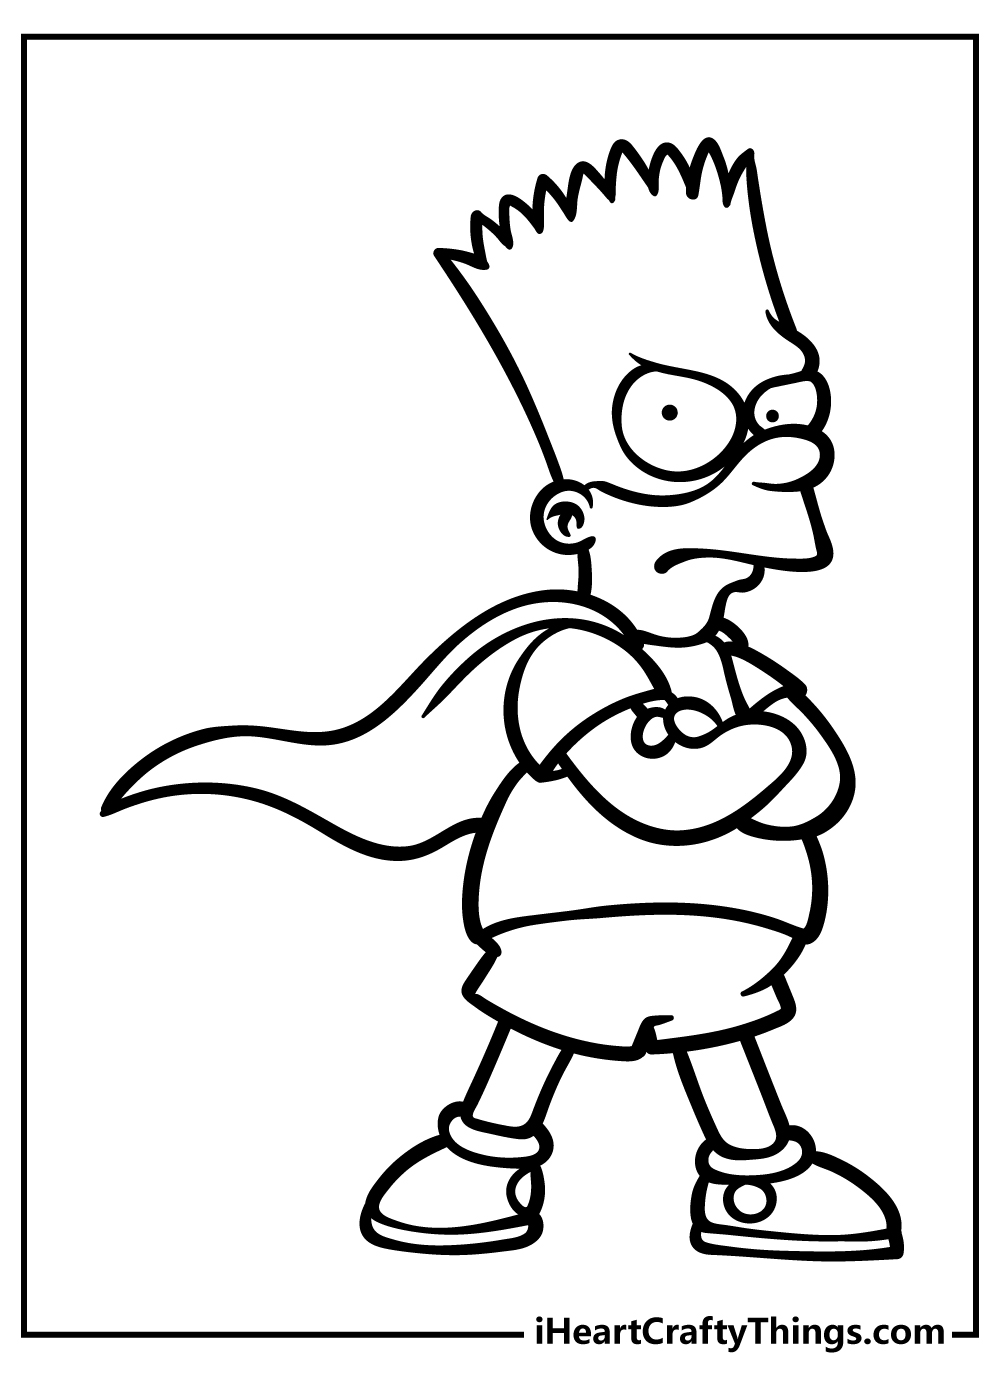 Simpsons Coloring Pages for adults free printable